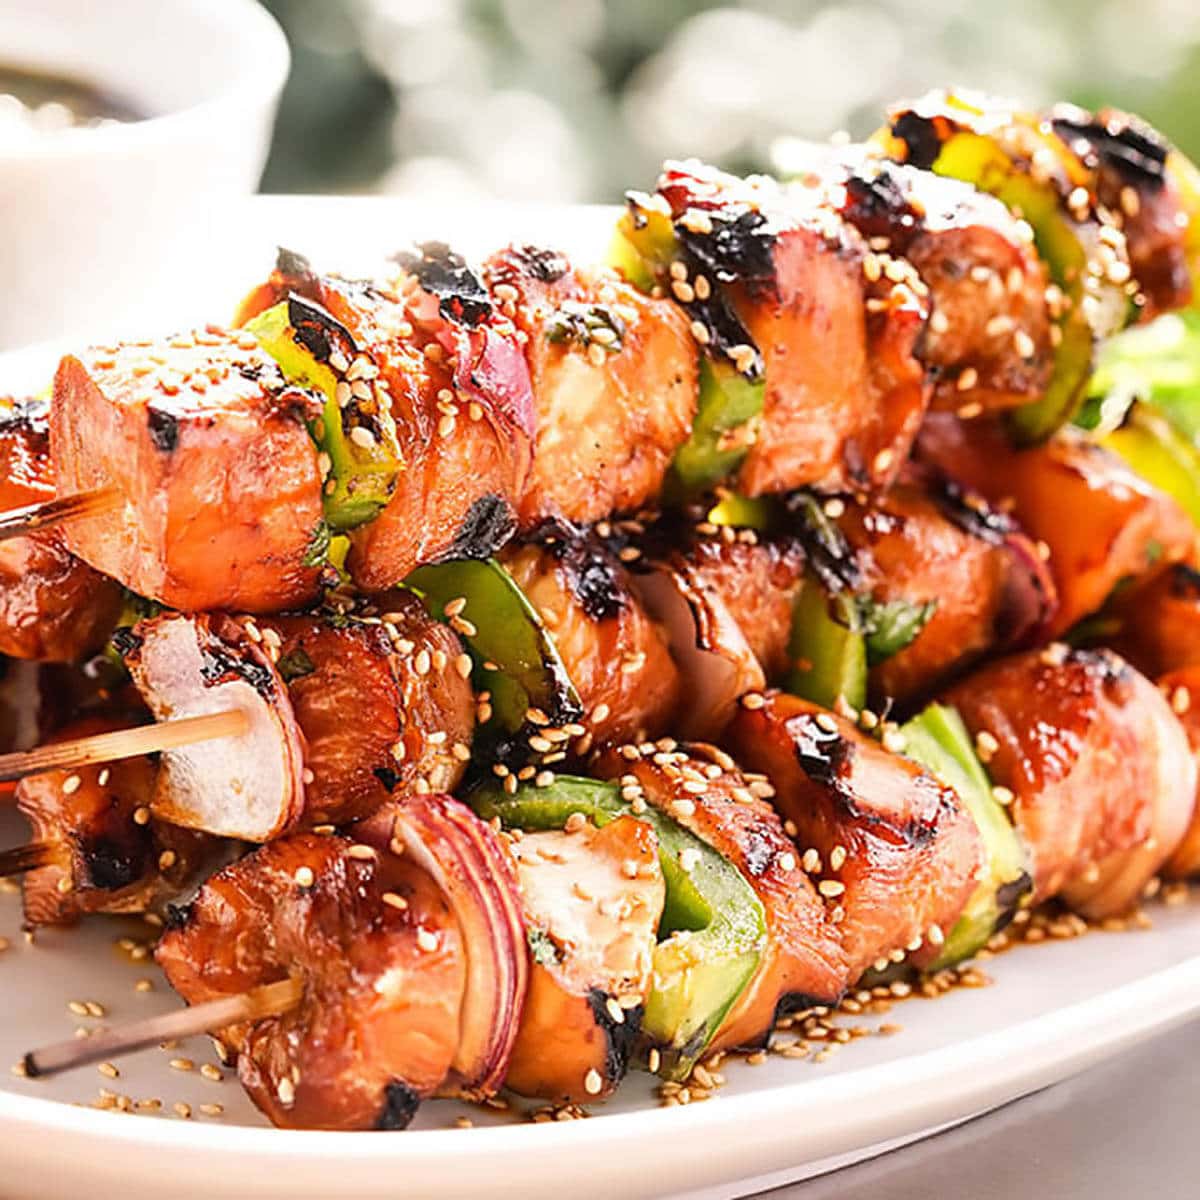 A stack of grilled teriyaki chicken kabobs on platter.